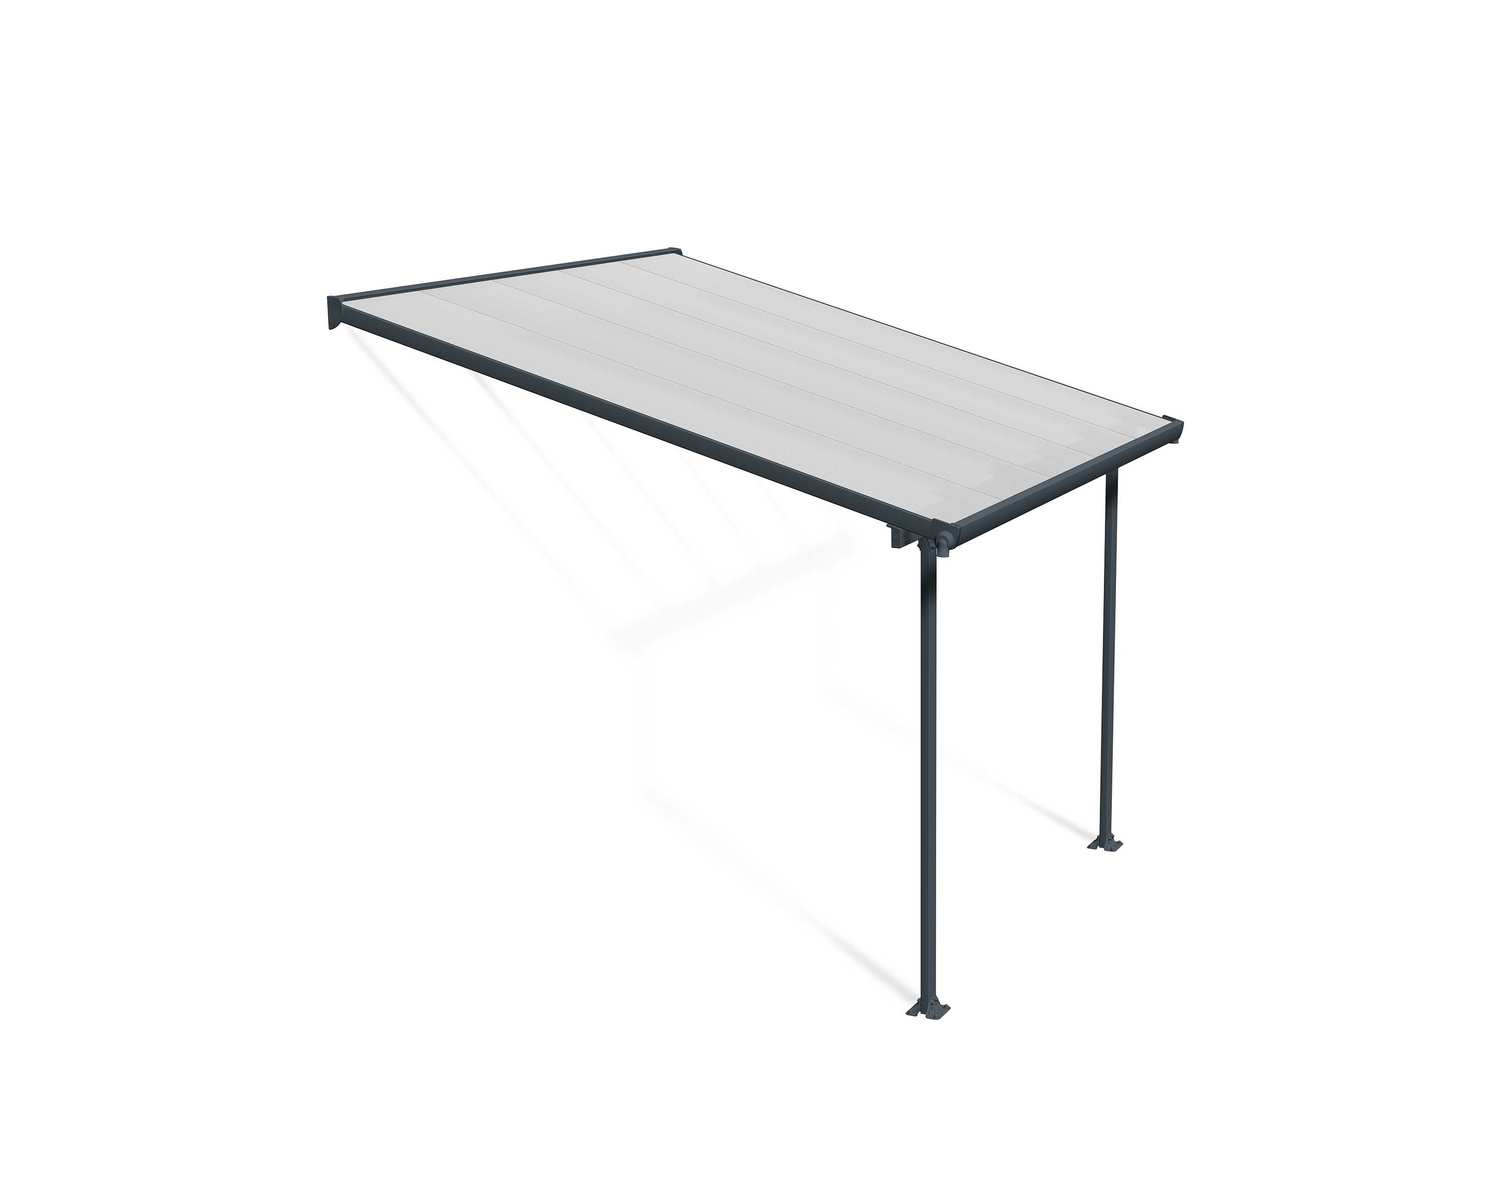 Feria 10 ft. x 10 ft. Grey Aluminium Patio Cover With 2 Posts, Clear Twin-Wall Polycarbonate Roof Panels